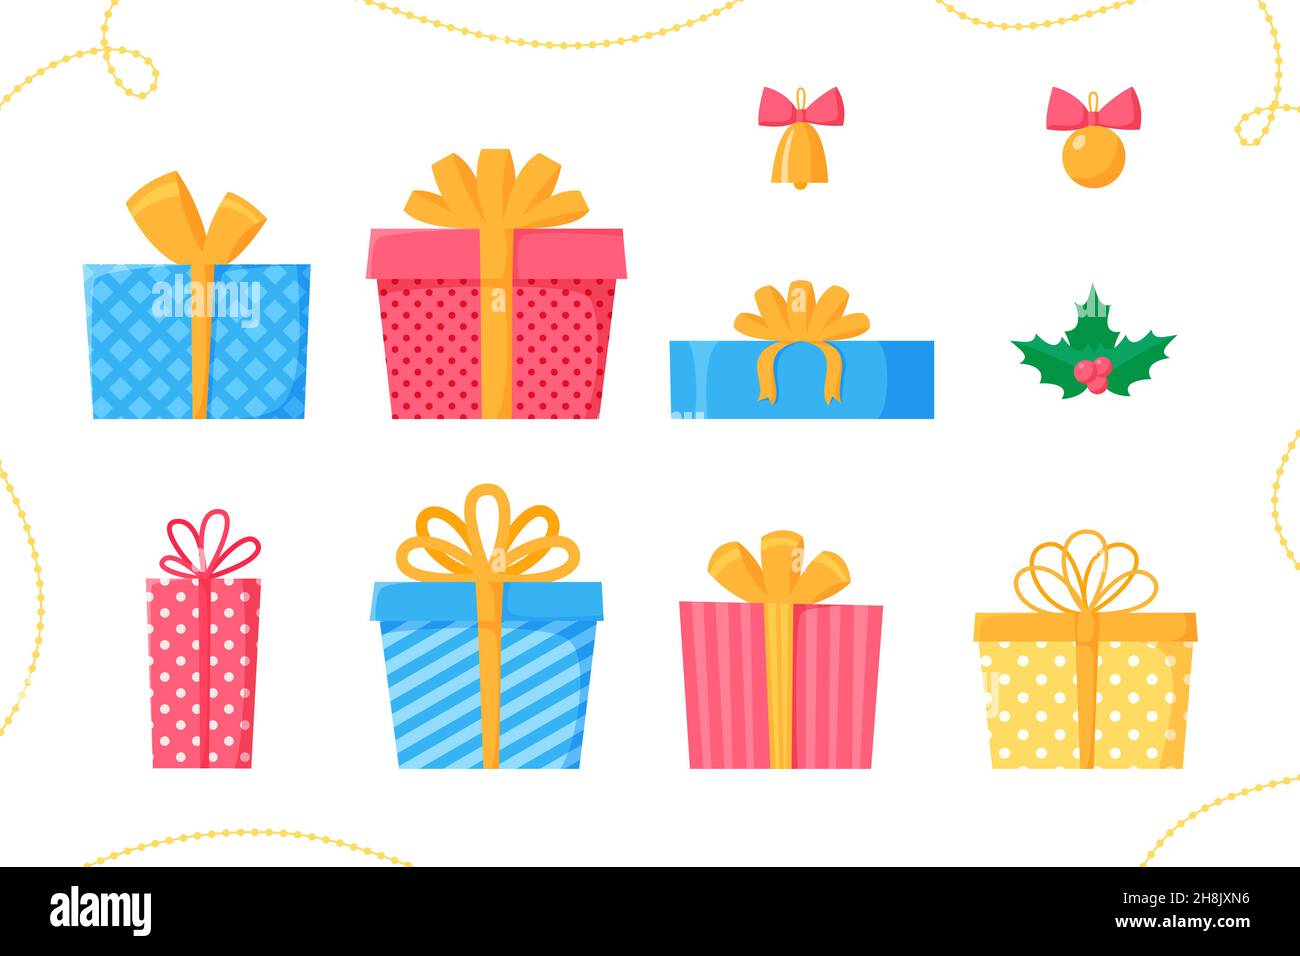 Gift boxes set. Presents and packages with ribbons and bows. Christmas decor, beads, ball, bell, holly collection. Flat vector Stock Vector